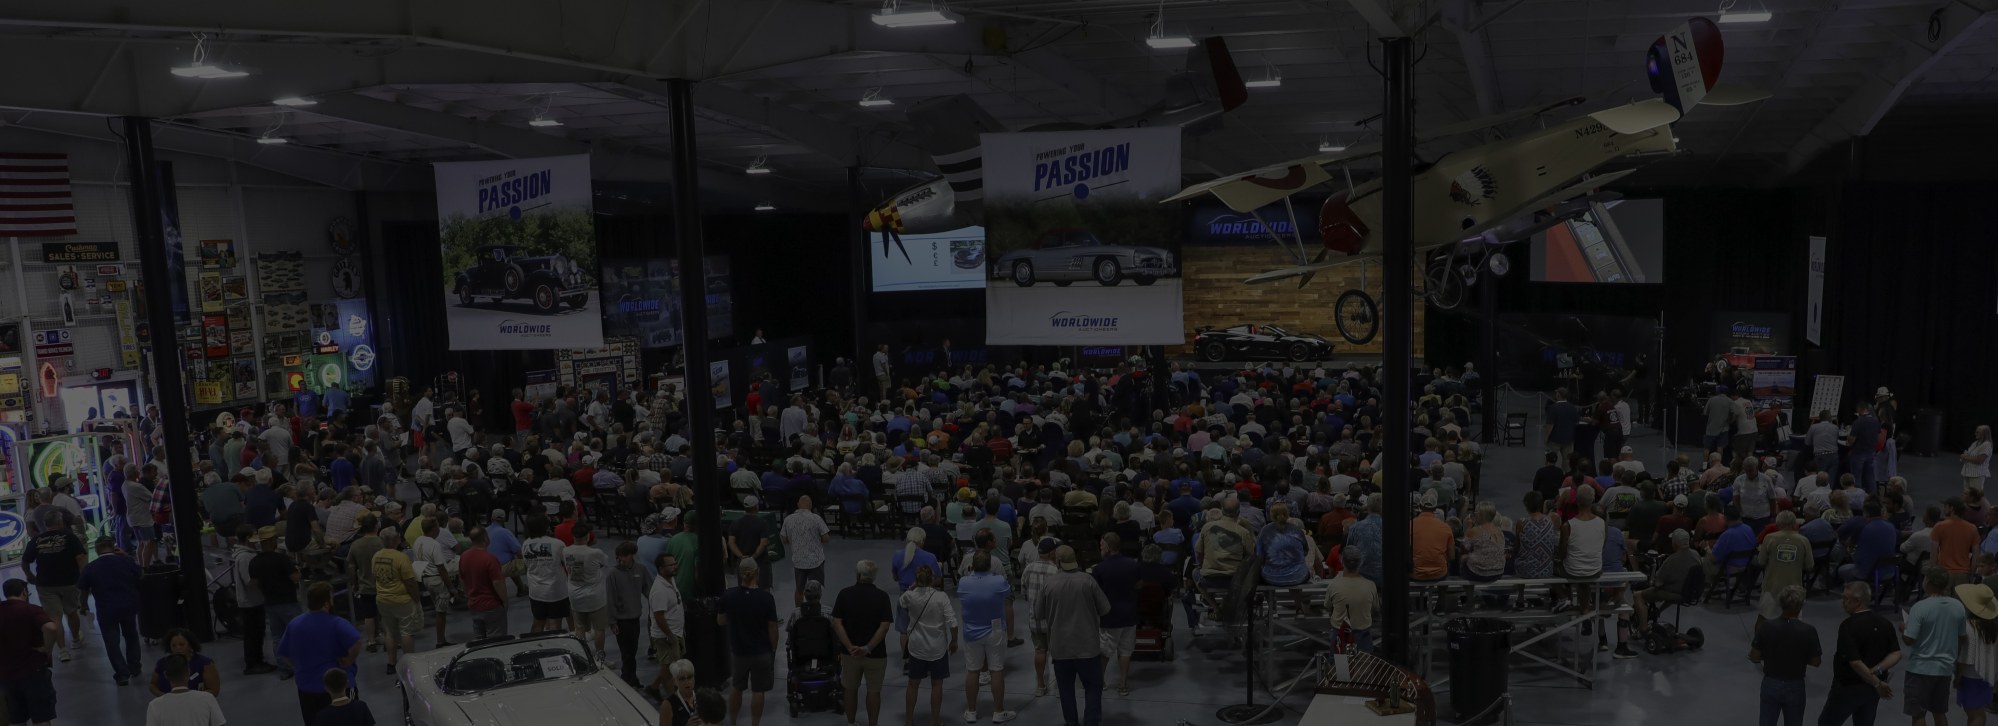 Sports and supercars lead the way at Worldwide’s Auburn Auction in Indiana